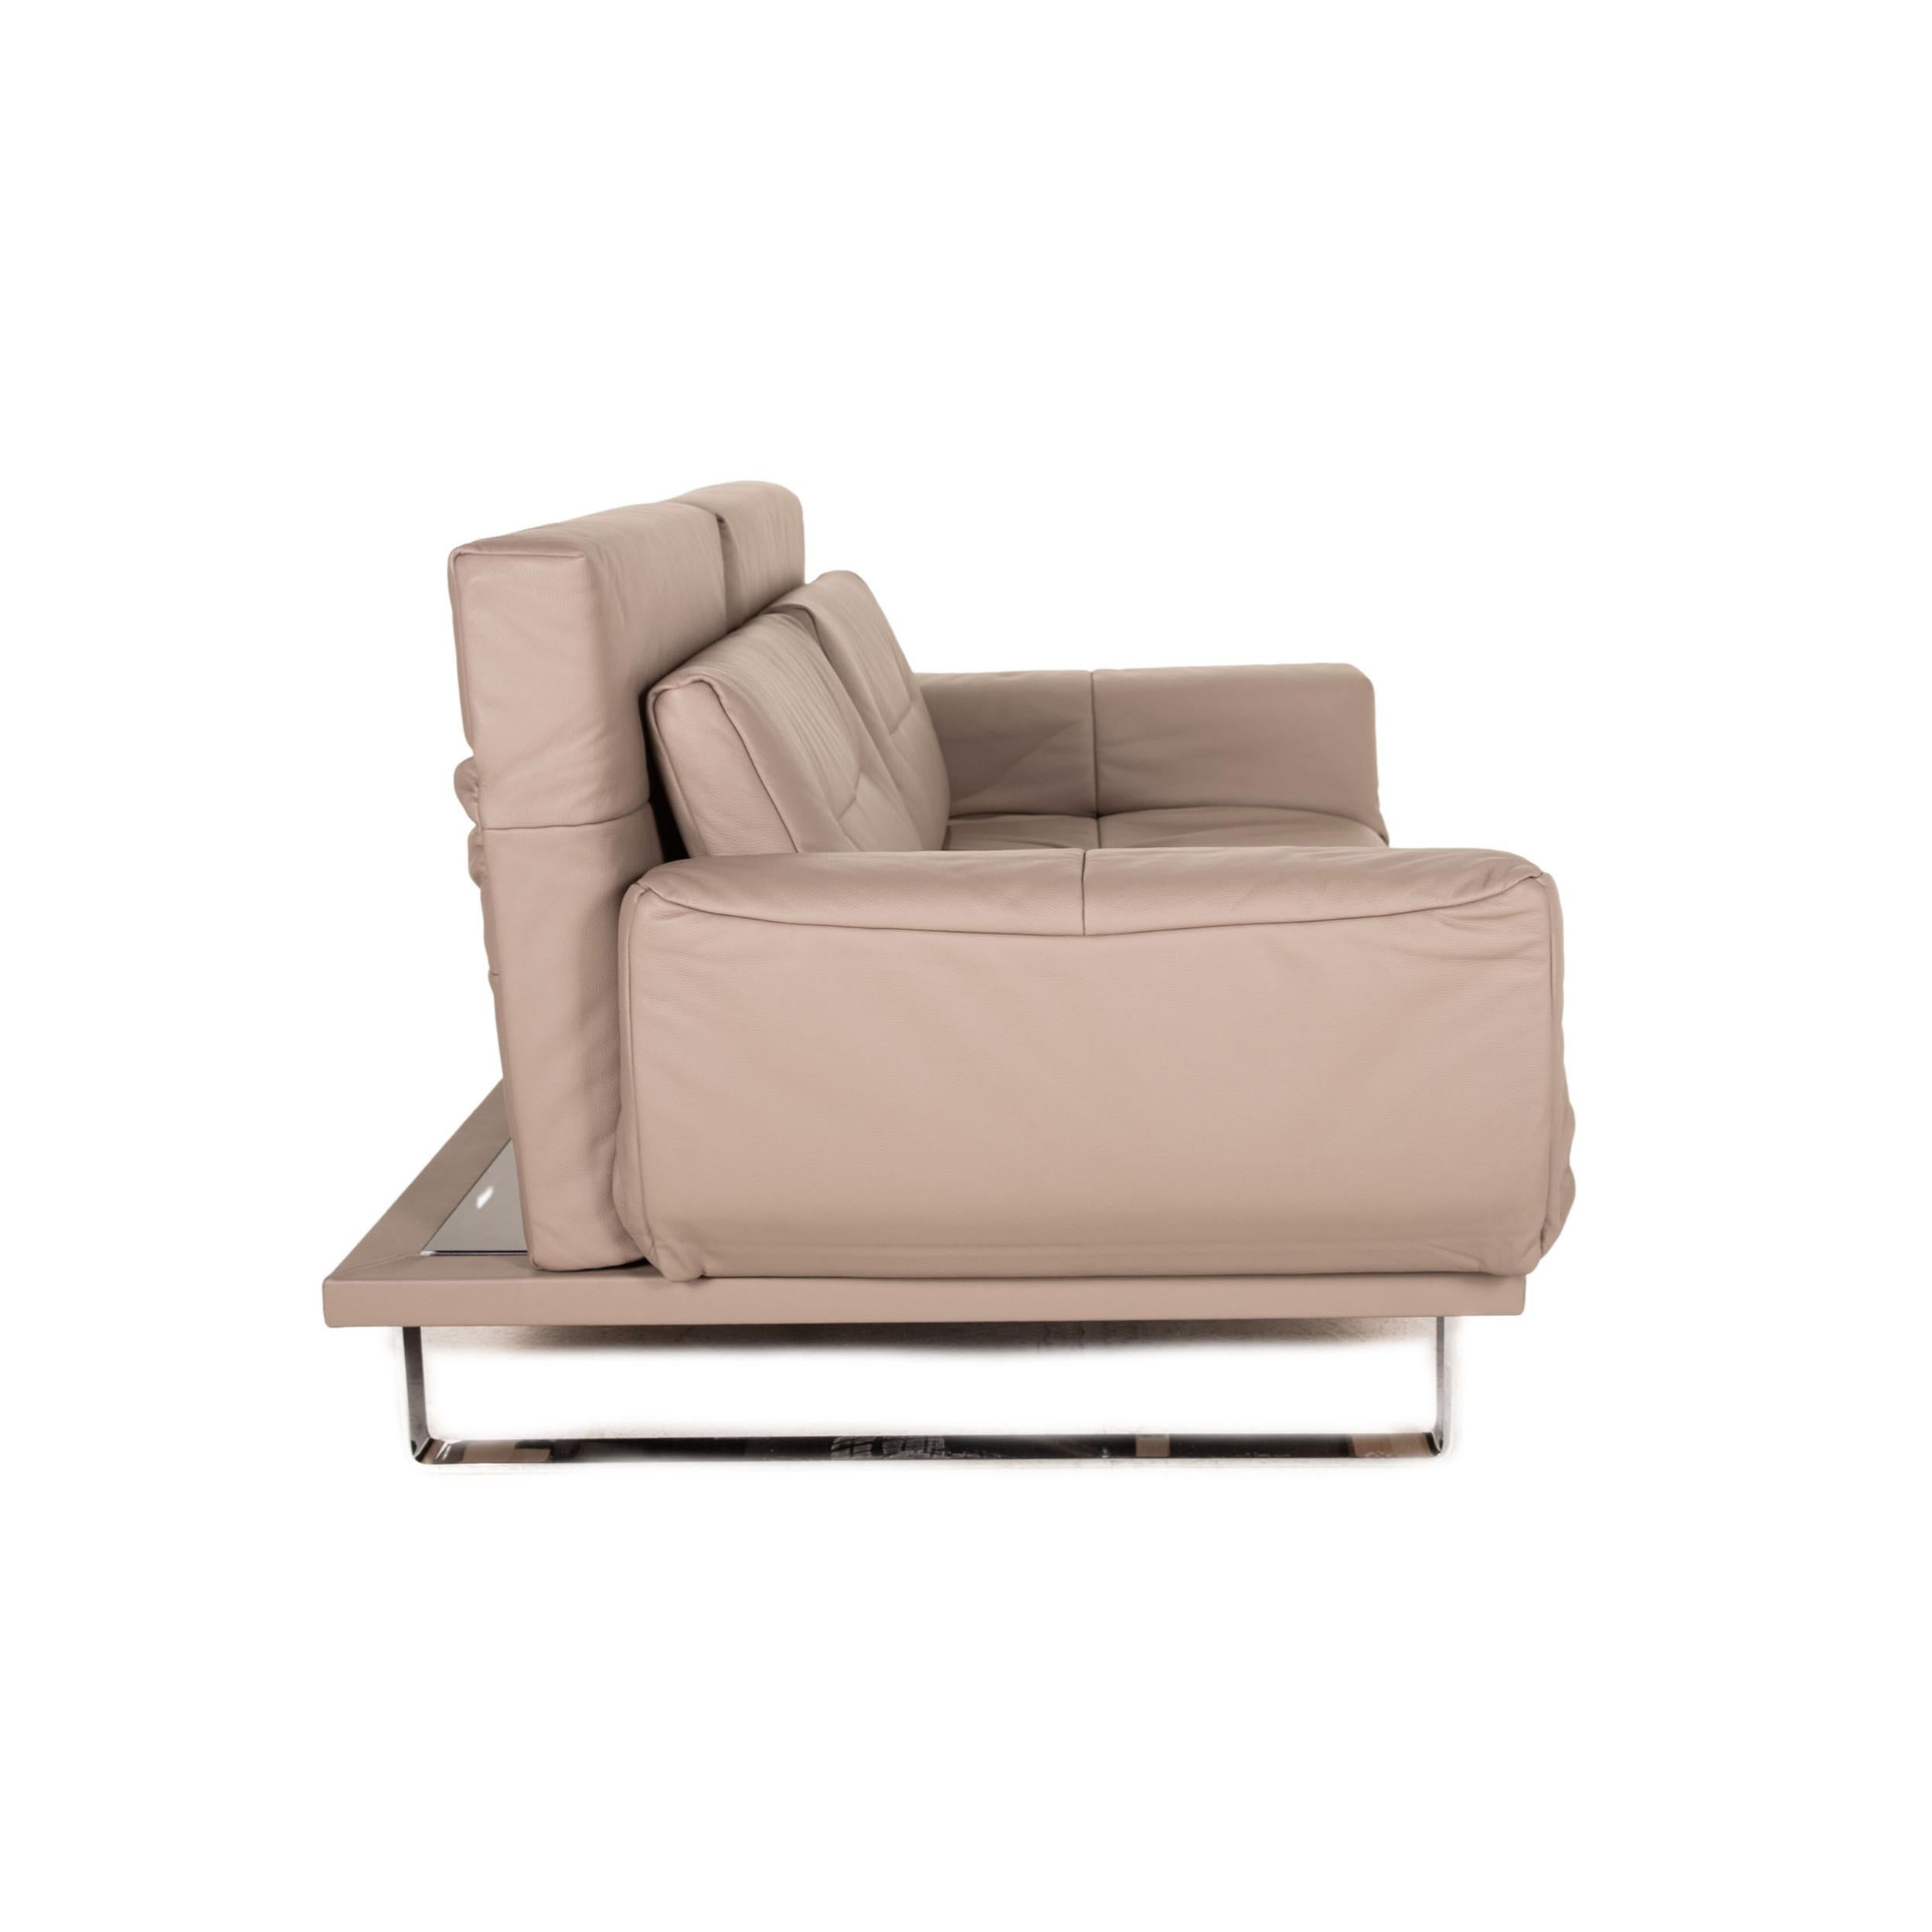 Franz Fertig Letto leather sofa beige two-seater function sleeping function For Sale 1